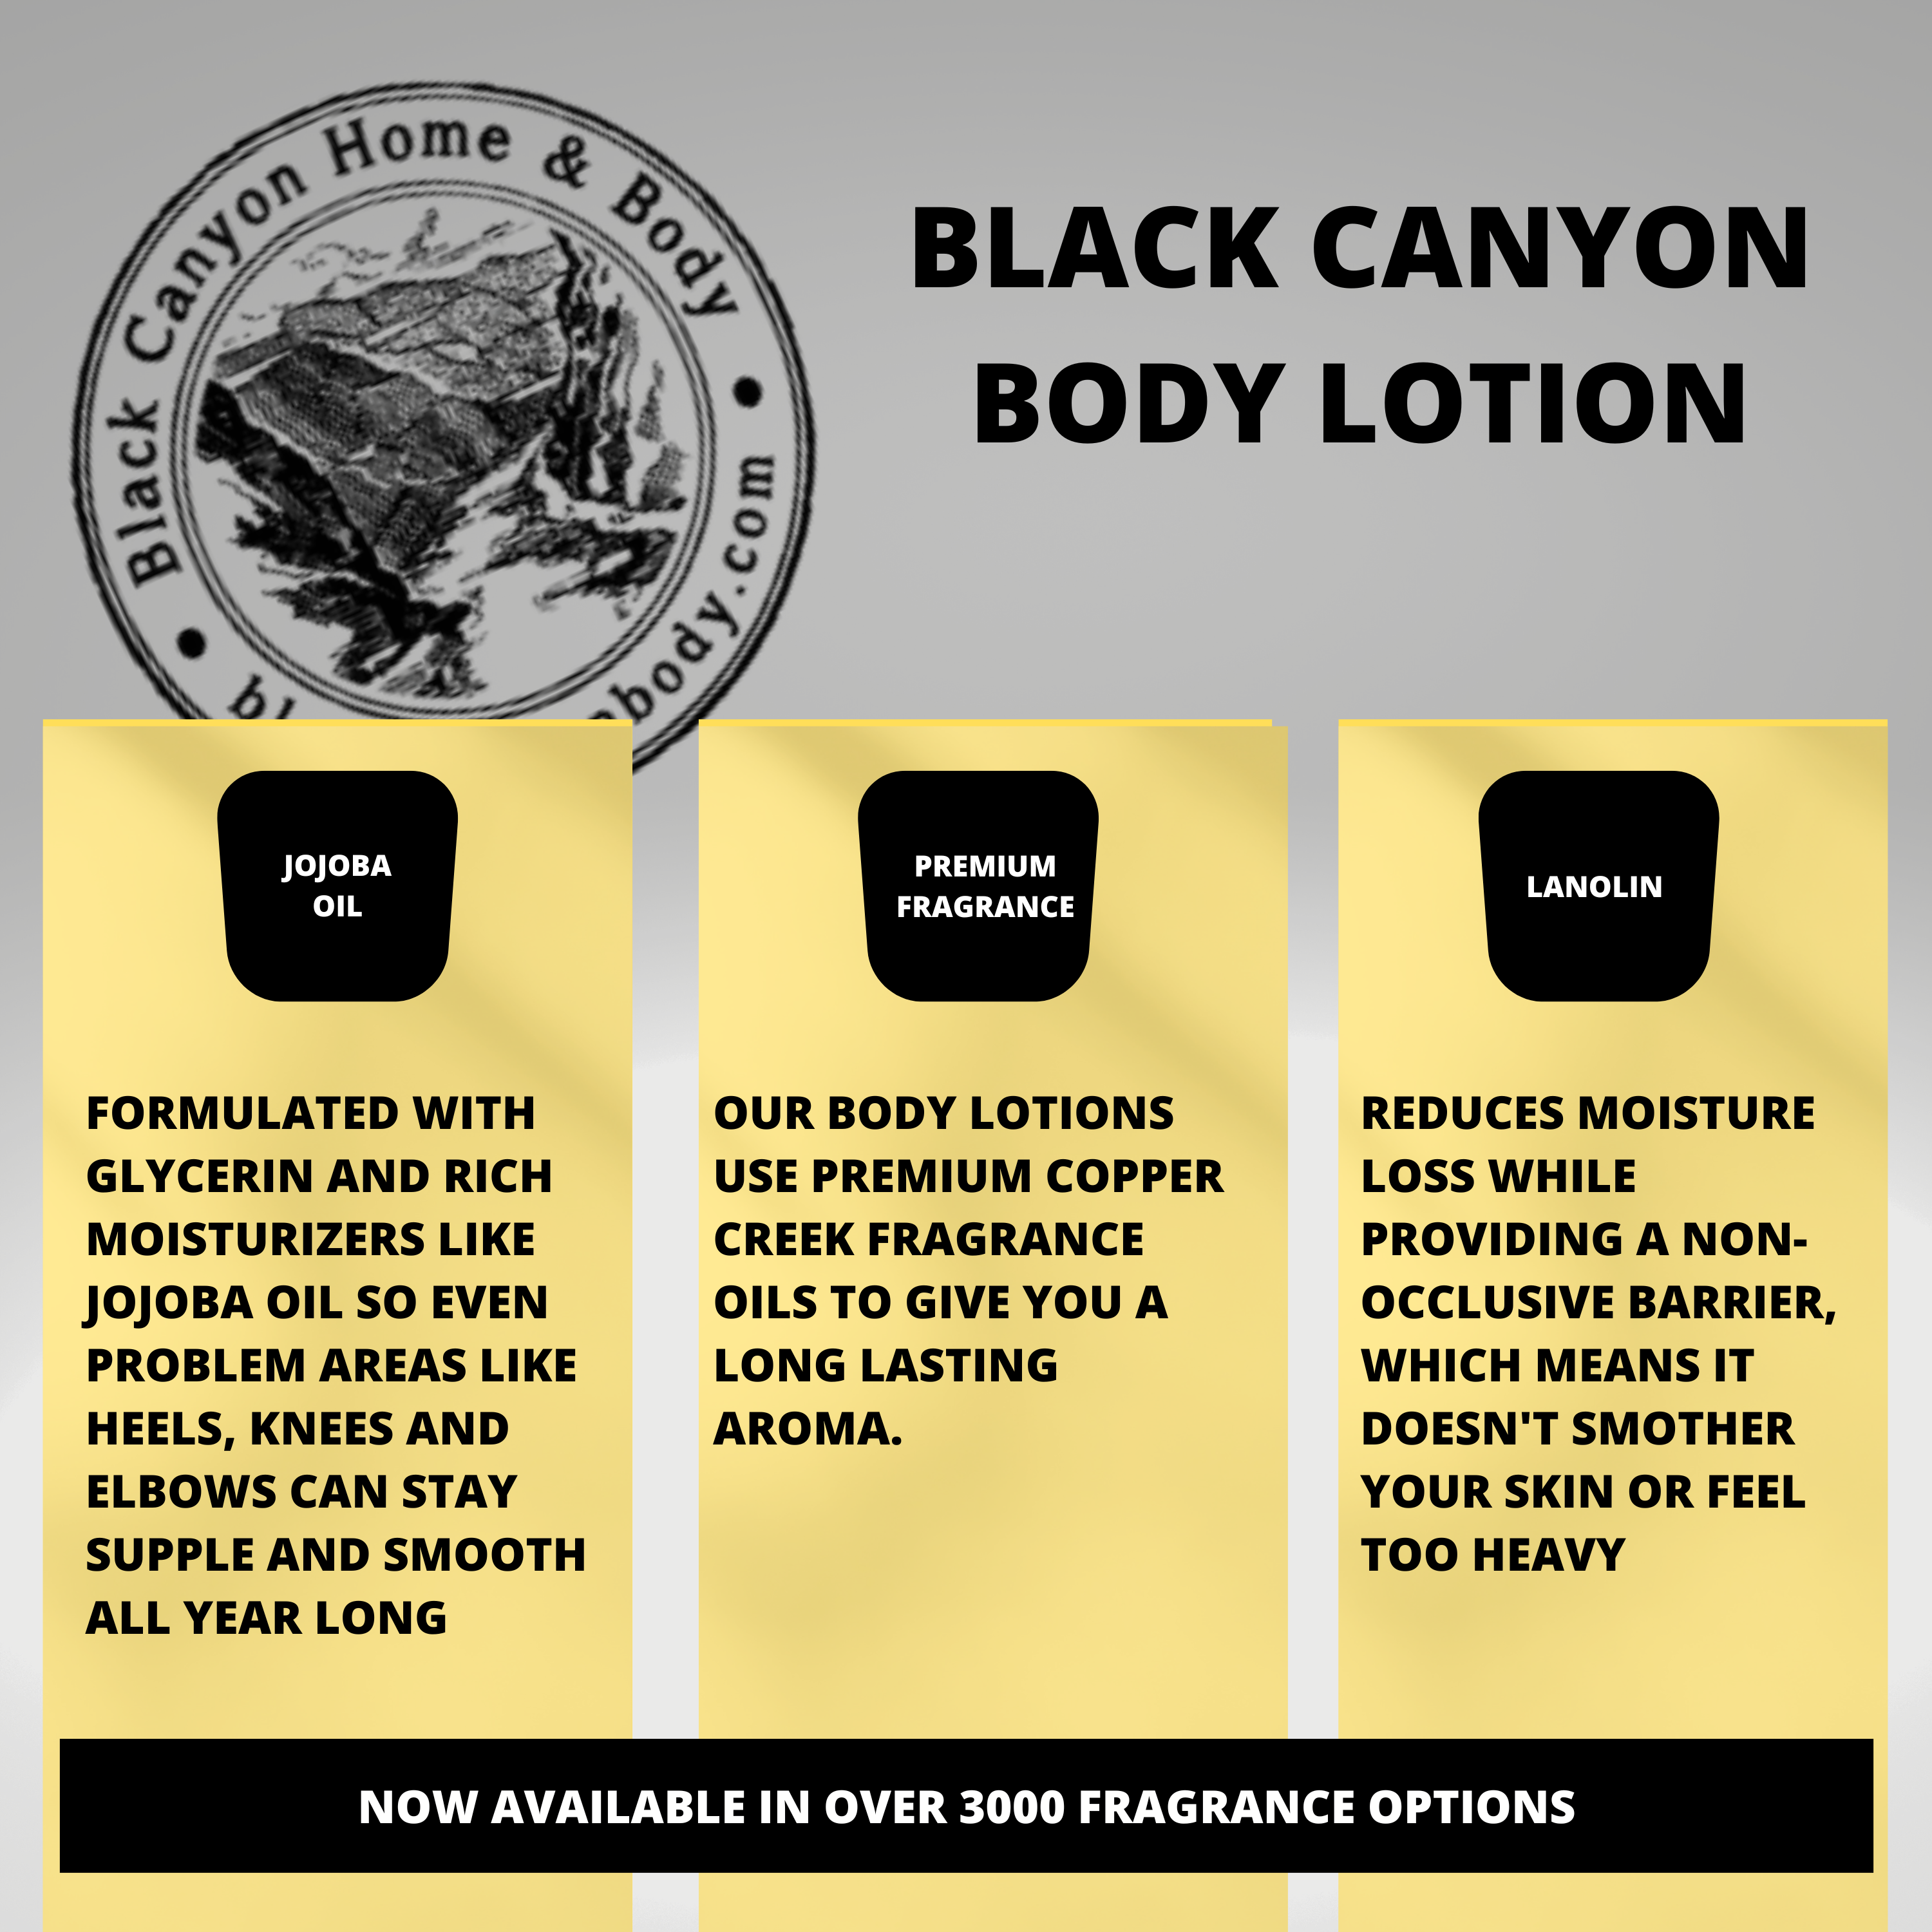 Black Canyon Butterscotch Syrup Scented Luxury Body Lotion with Lanolin and Jojoba Oil